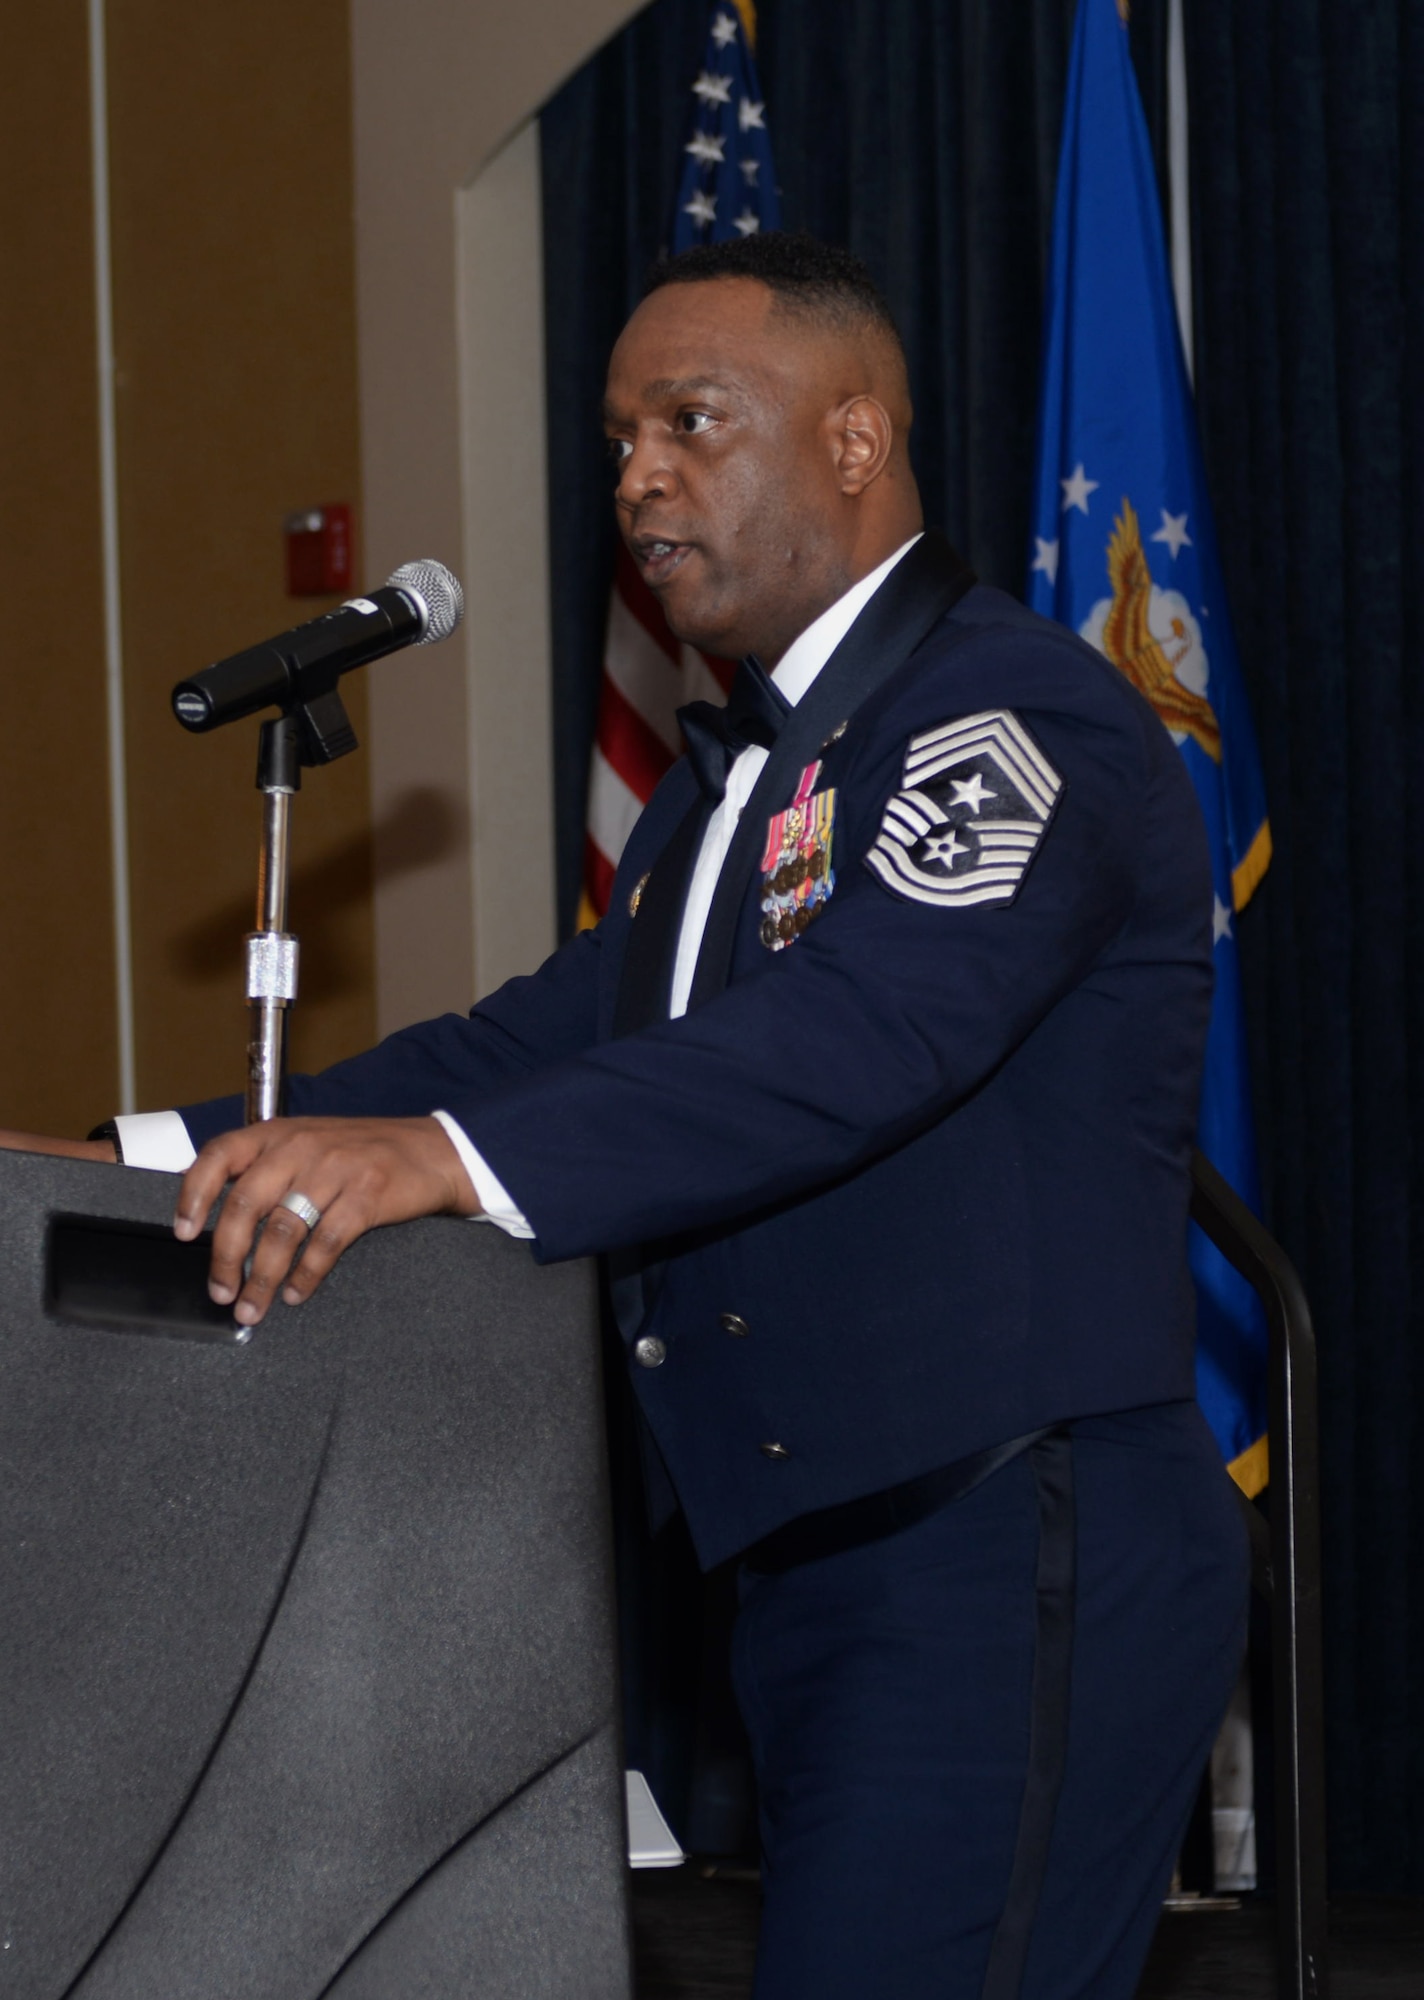 Chief Master Sgt. Calvin Williams, Air Force Global Strike Command command chief, speaks to attendees of Ellsworth’s chief recognition ceremony at the Dakota’s Club during a visit to Ellsworth Air Force Base, S.D., March 2, 2017. The ceremony recognized the base’s four senior noncommissioned officers who were recently promoted to the top 1 percent of the Air Force’s enlisted corps. (U.S. Air Force photo by Airman 1st Class Denise M. Jenson)